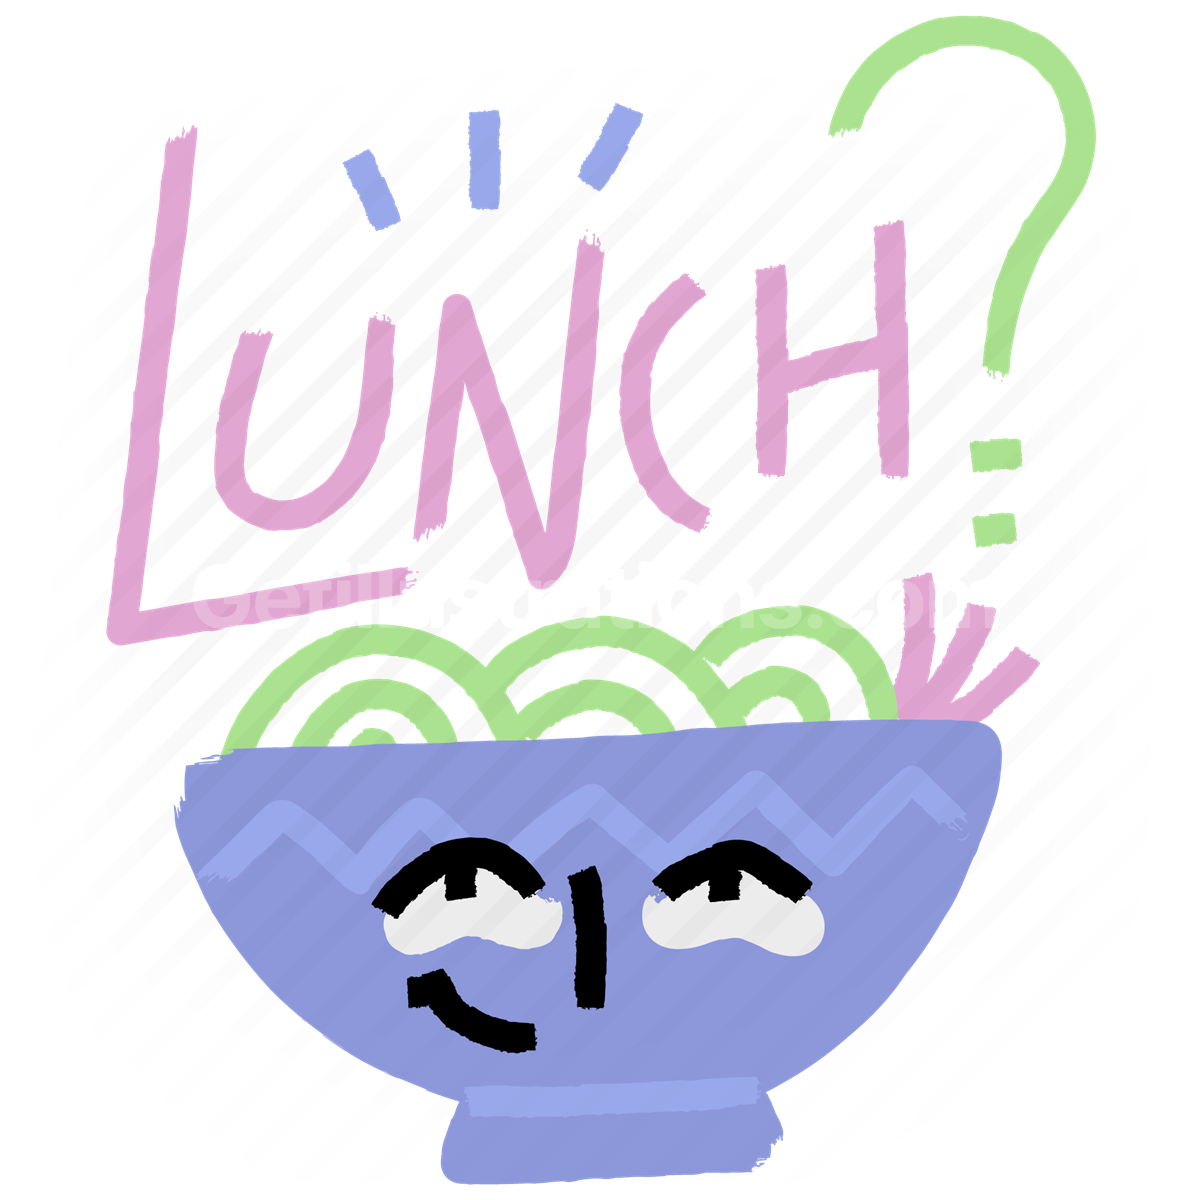 lunch, bowl, meal, sticker, character, invitation